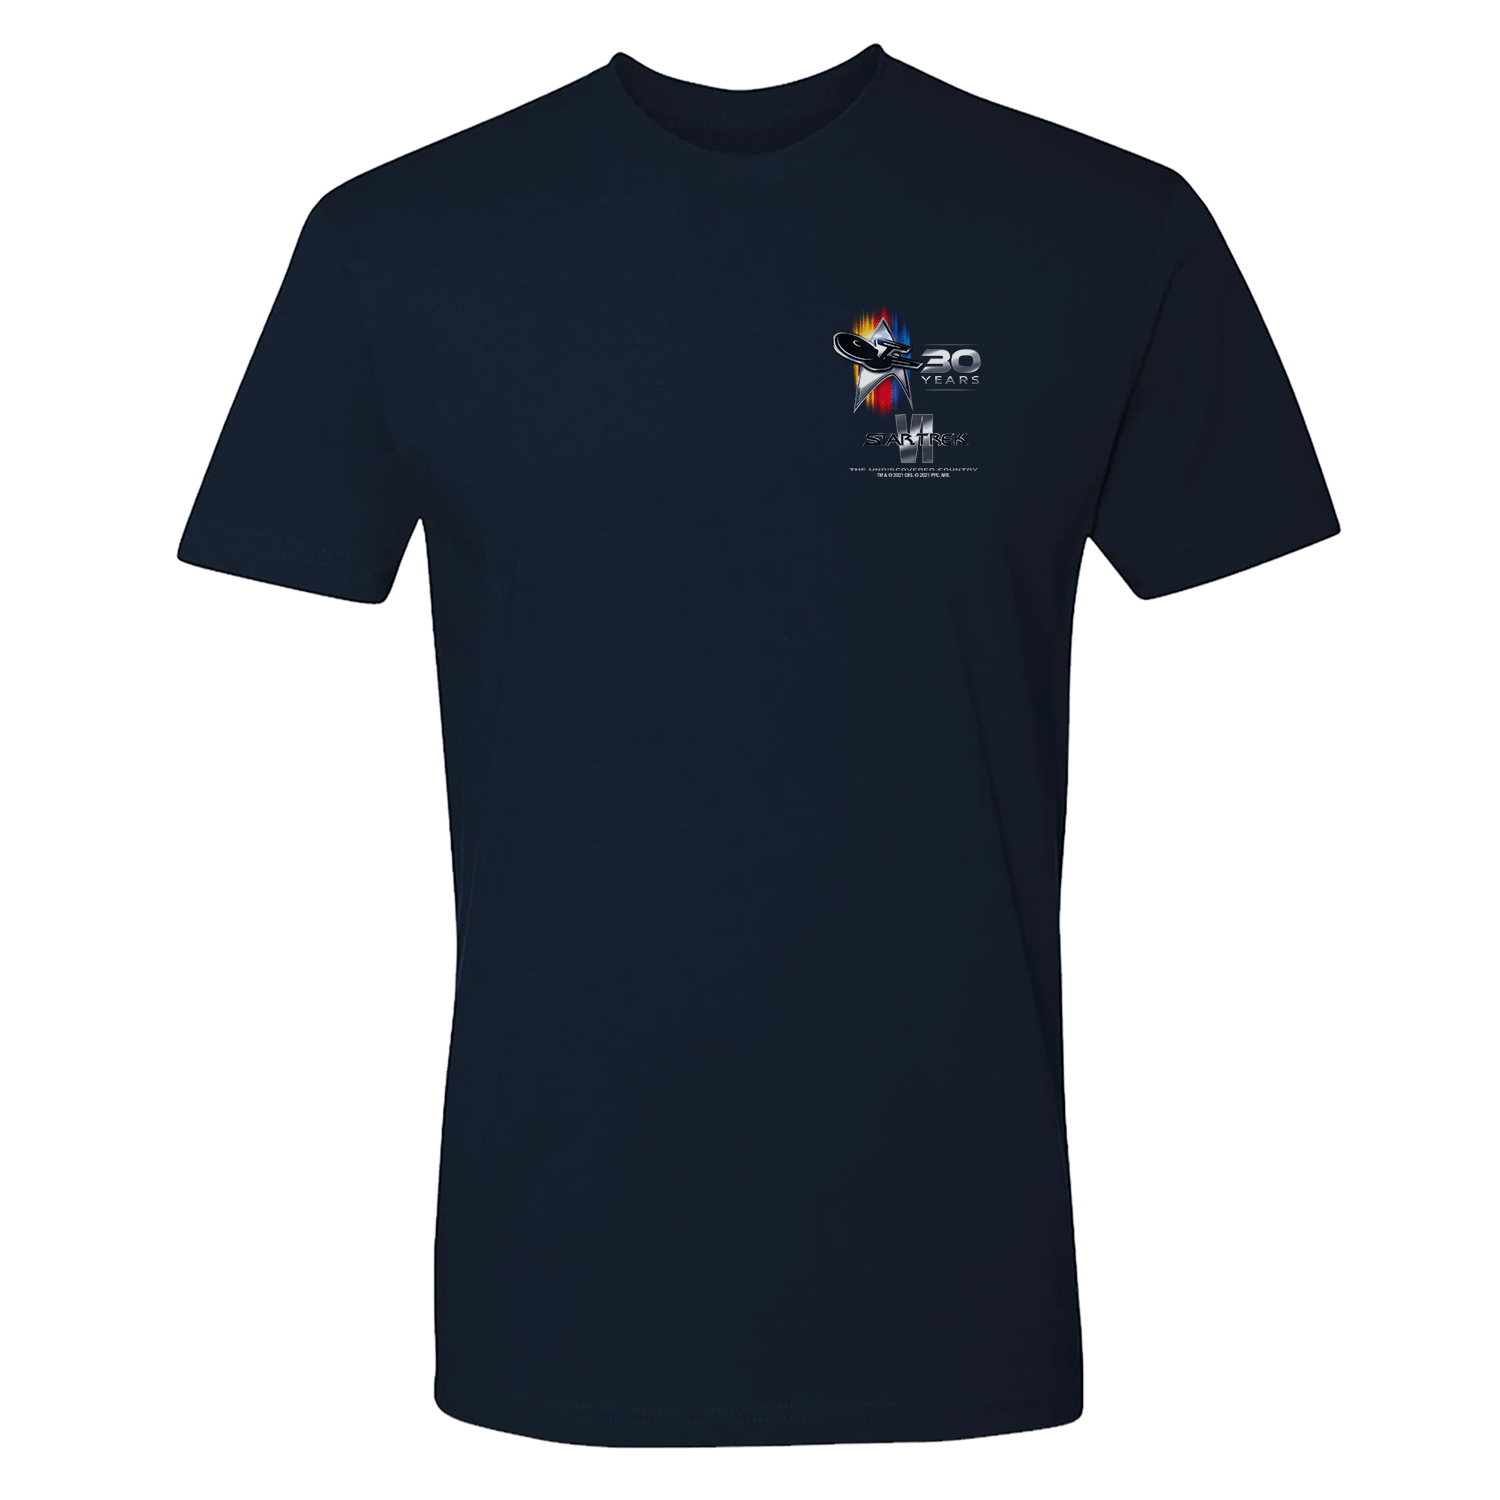 Star Trek VI: The Undiscovered Country 30th Anniversary Small Logo Adult Short Sleeve T - Shirt - Paramount Shop